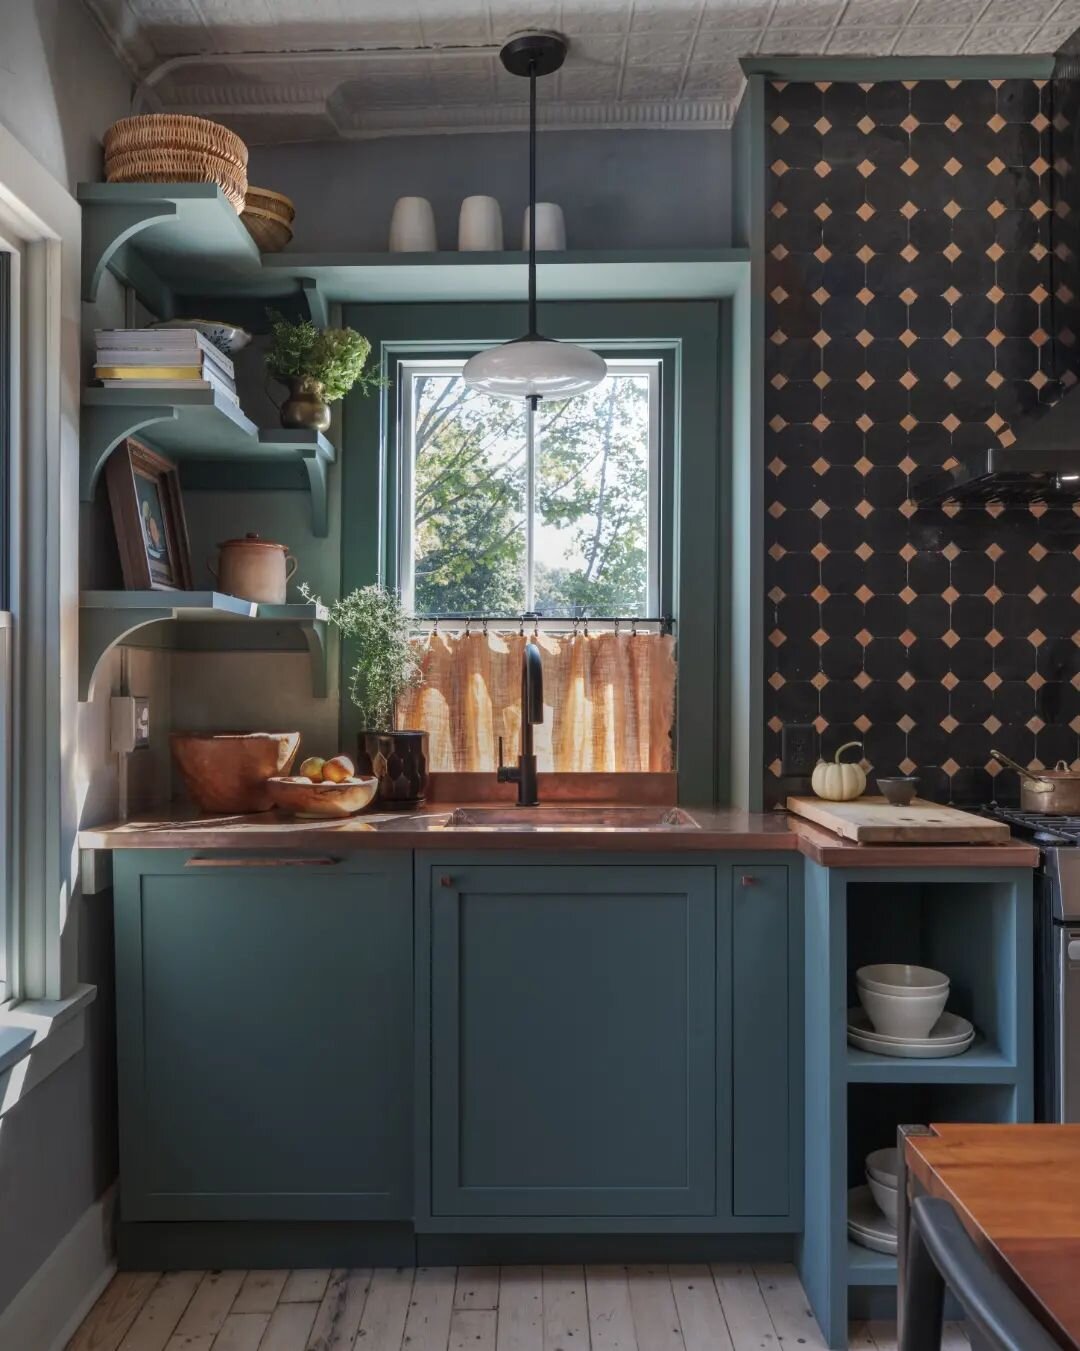 Did you love the #2021kdcshowhouse kitchen by #interiordesigner @jesikafarkasdesign?
Get the look by shopping items from this space at link in bio @fieldandsupply. And don't miss viewing the #kingstondesignshowhouse virtual tour in case you missed it